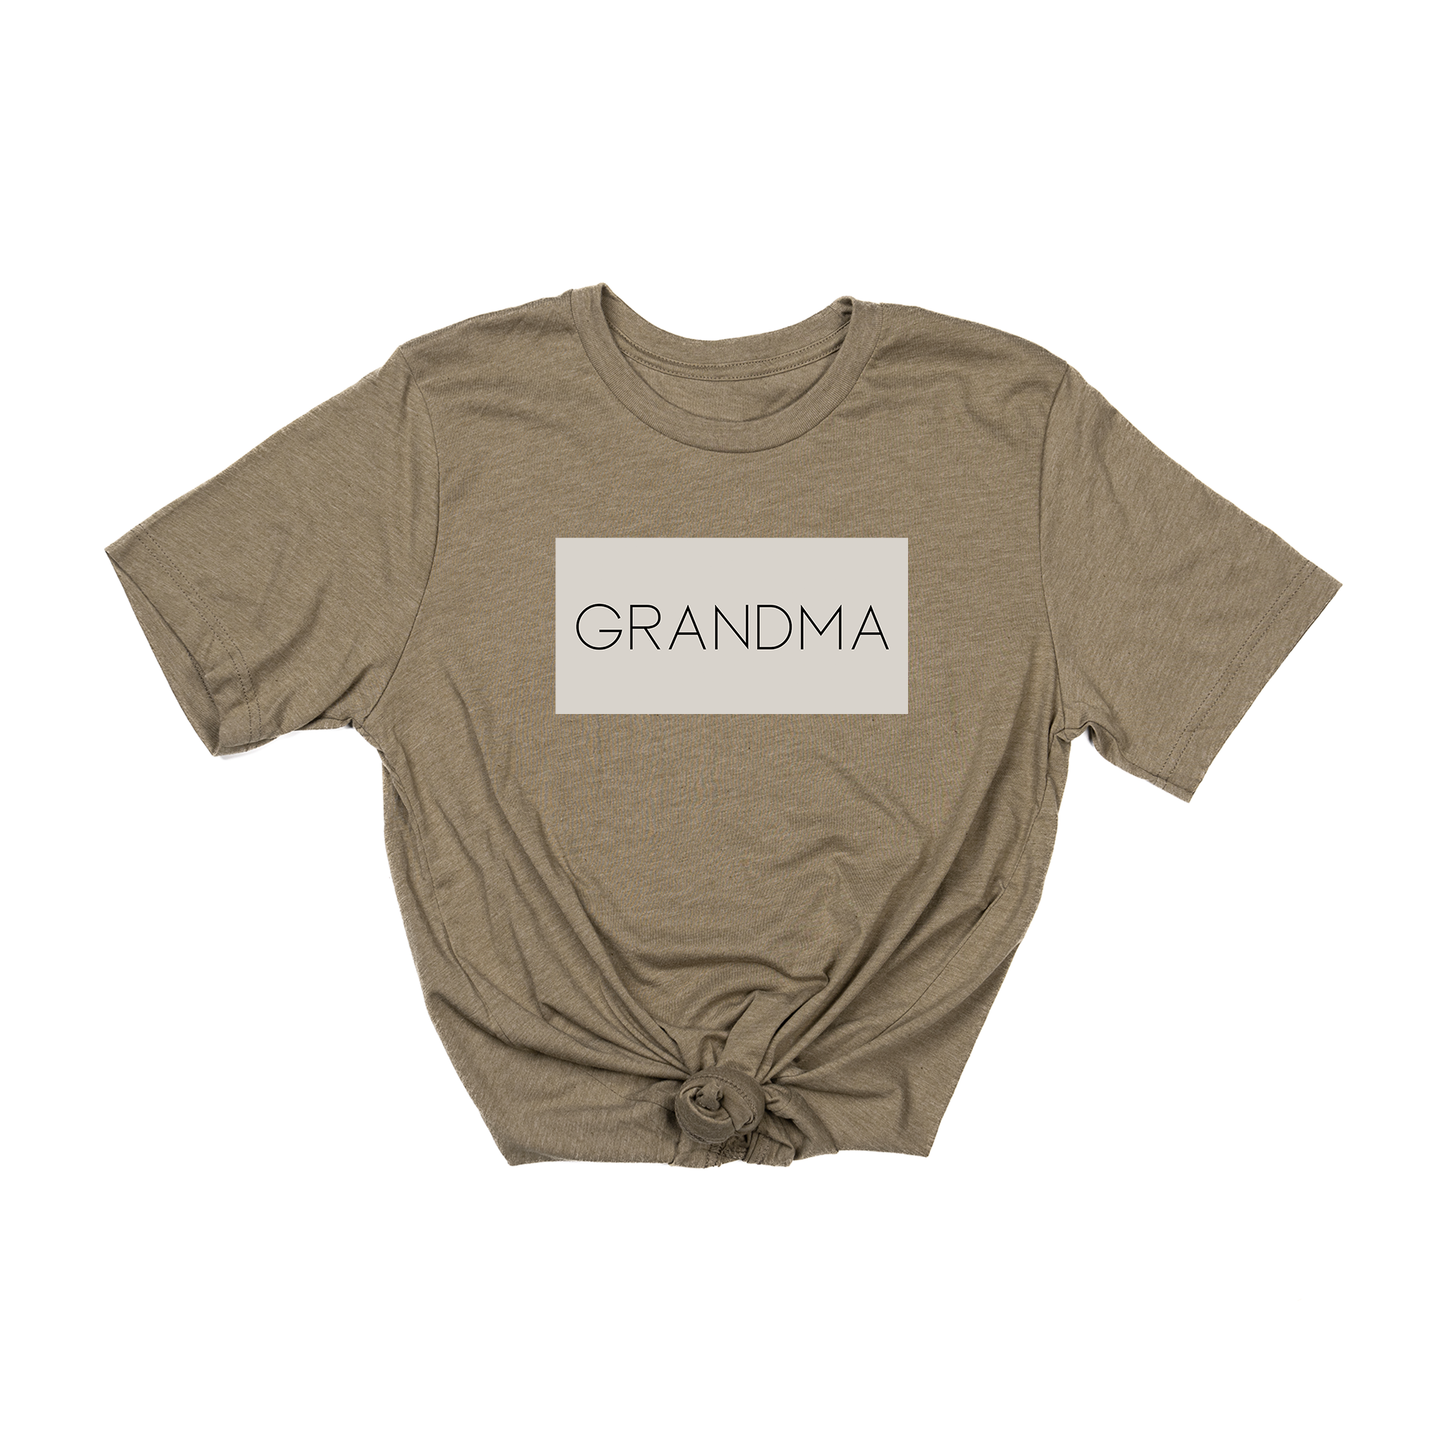 Grandma (Boxed Collection, Stone Box/Black Text, Across Front) - Tee (Olive)